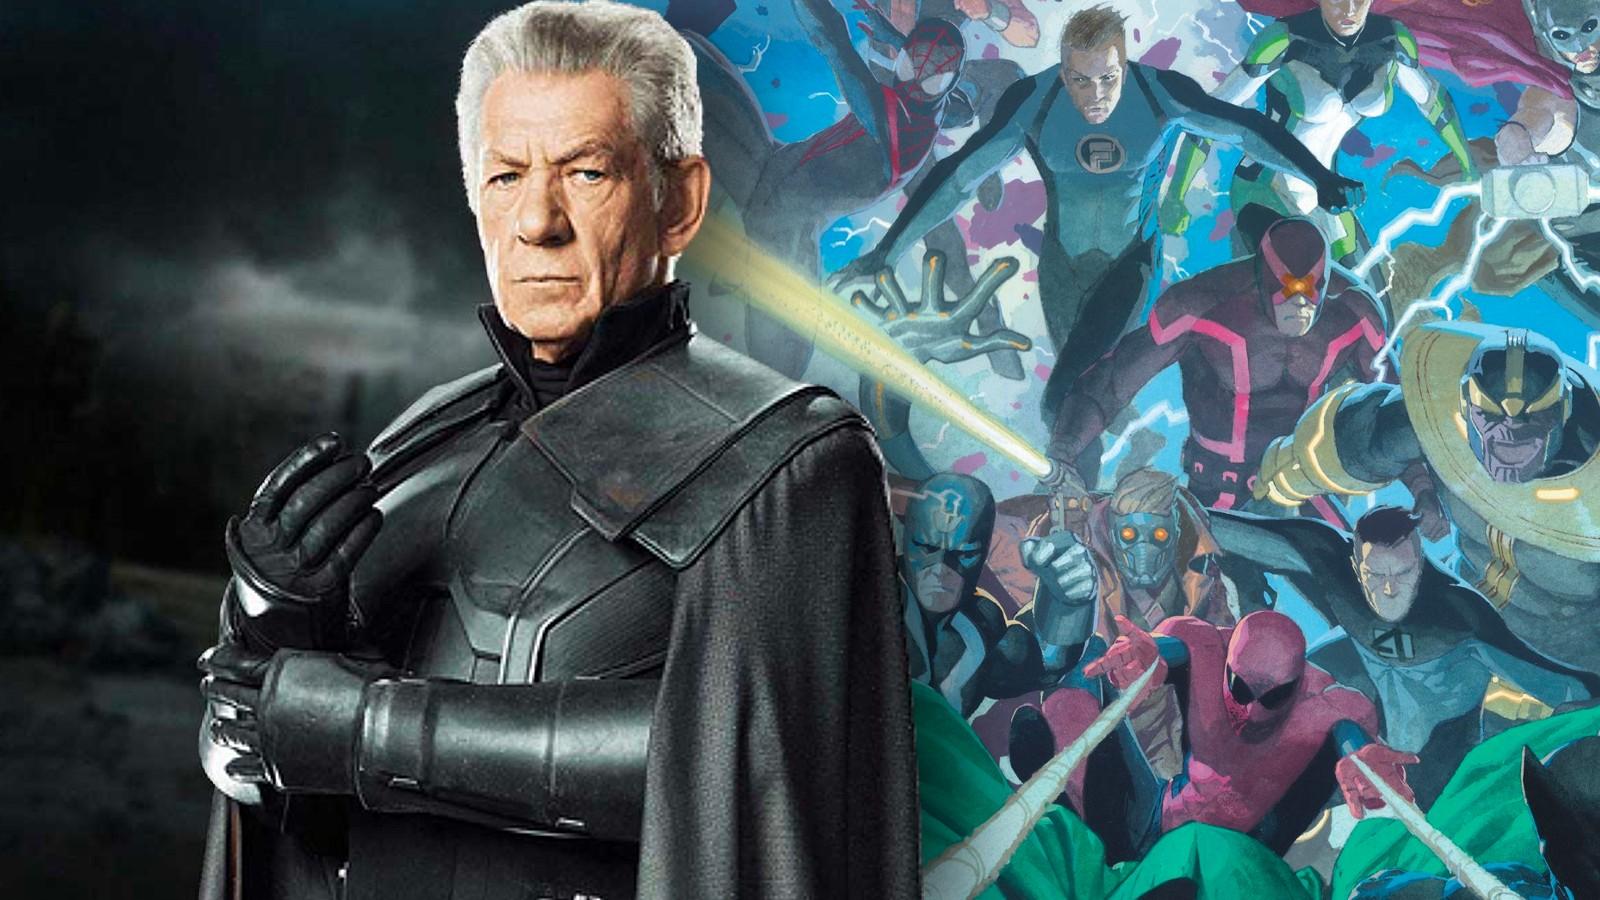 Ian McKellen as Magneto and the cover for Secret Wars